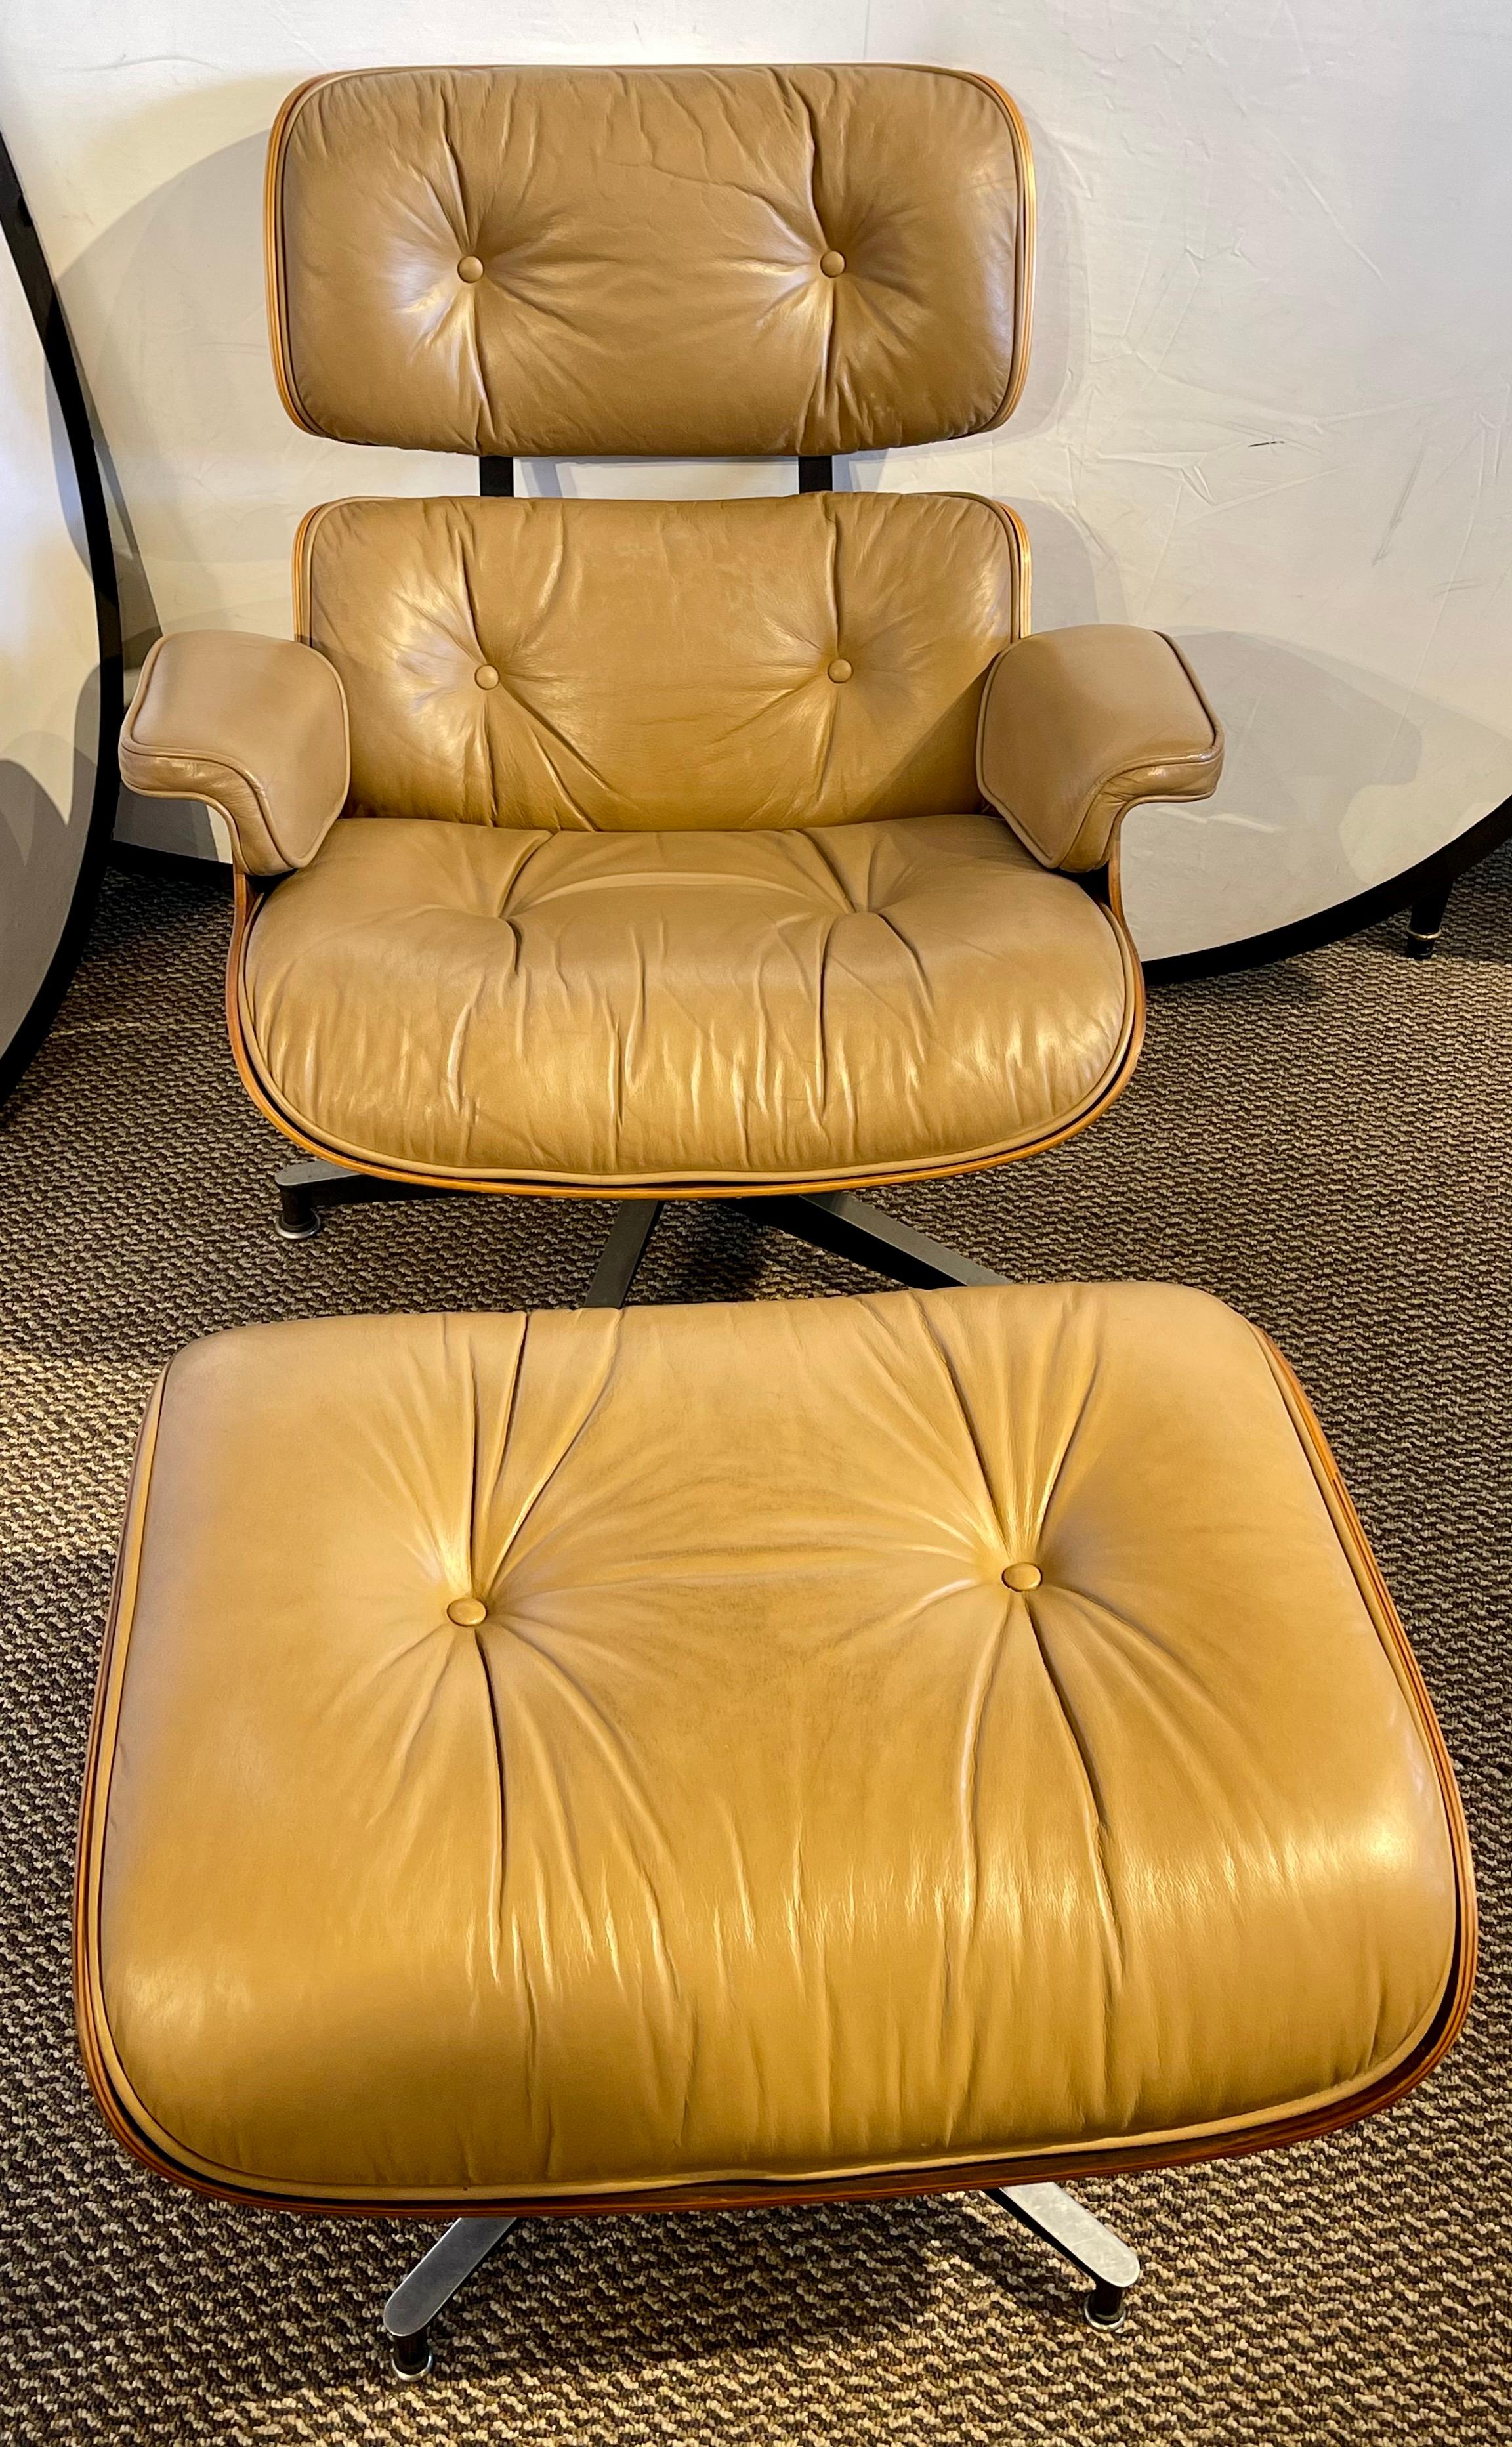 Charles Eames, Herman Miller Mid-Century Modern chair & ottoman. A stunning example of Eames Miller style and grace from the Mid-Century Modern era. This rosewood framed chair has its original leather upholstery that is so slightly worn that it is